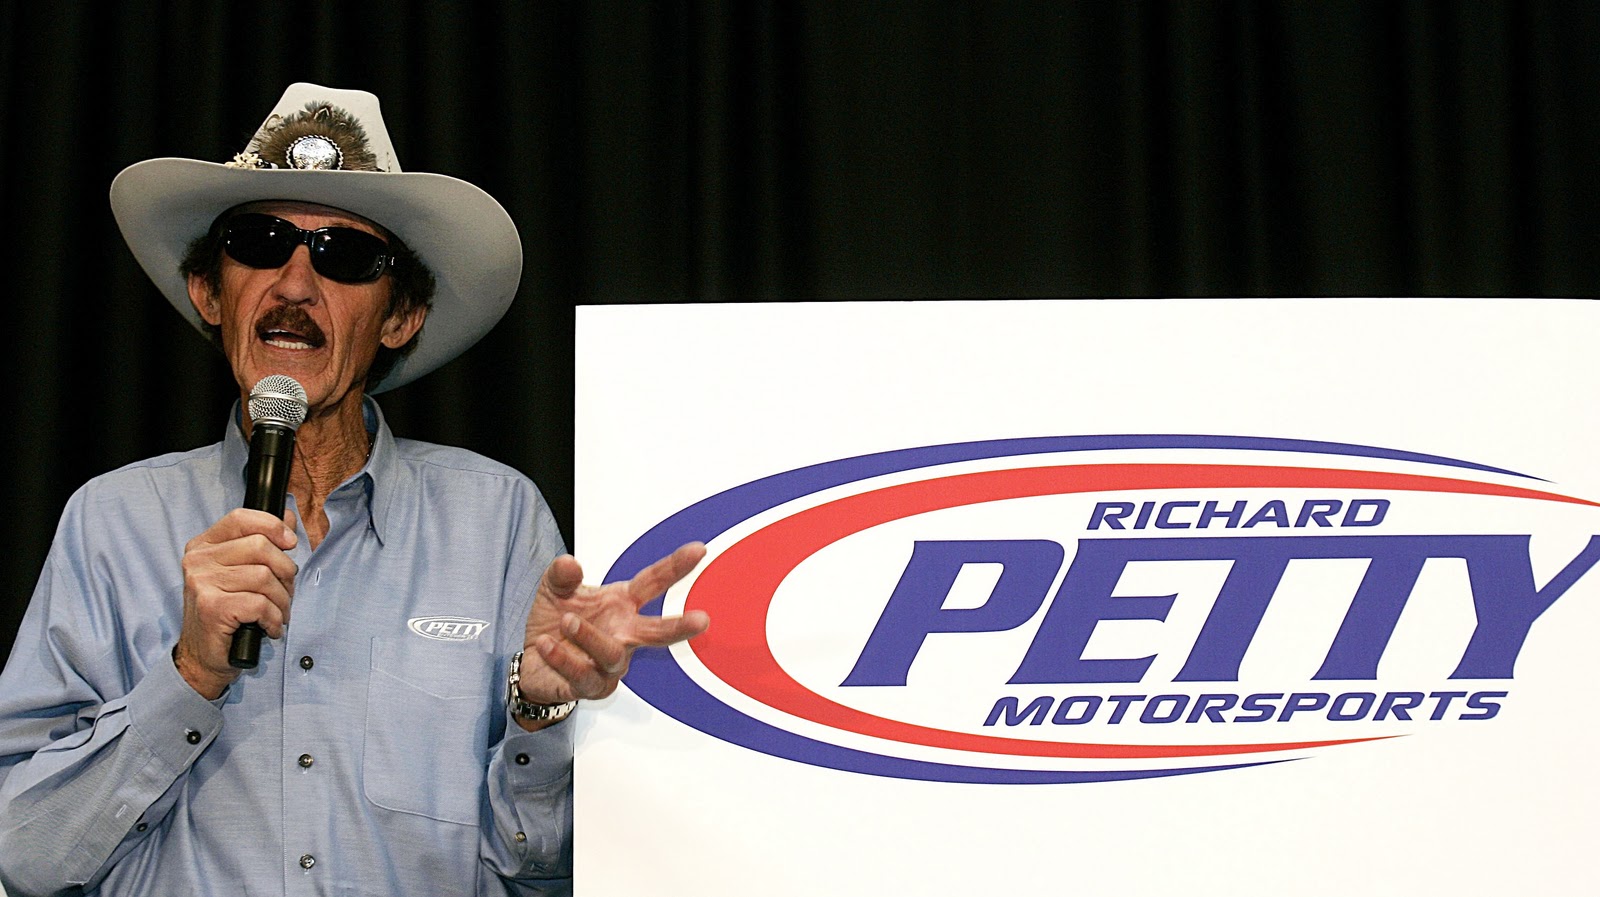 Richard Petty and financial partners take control of RPM - Skirts and Scuffs